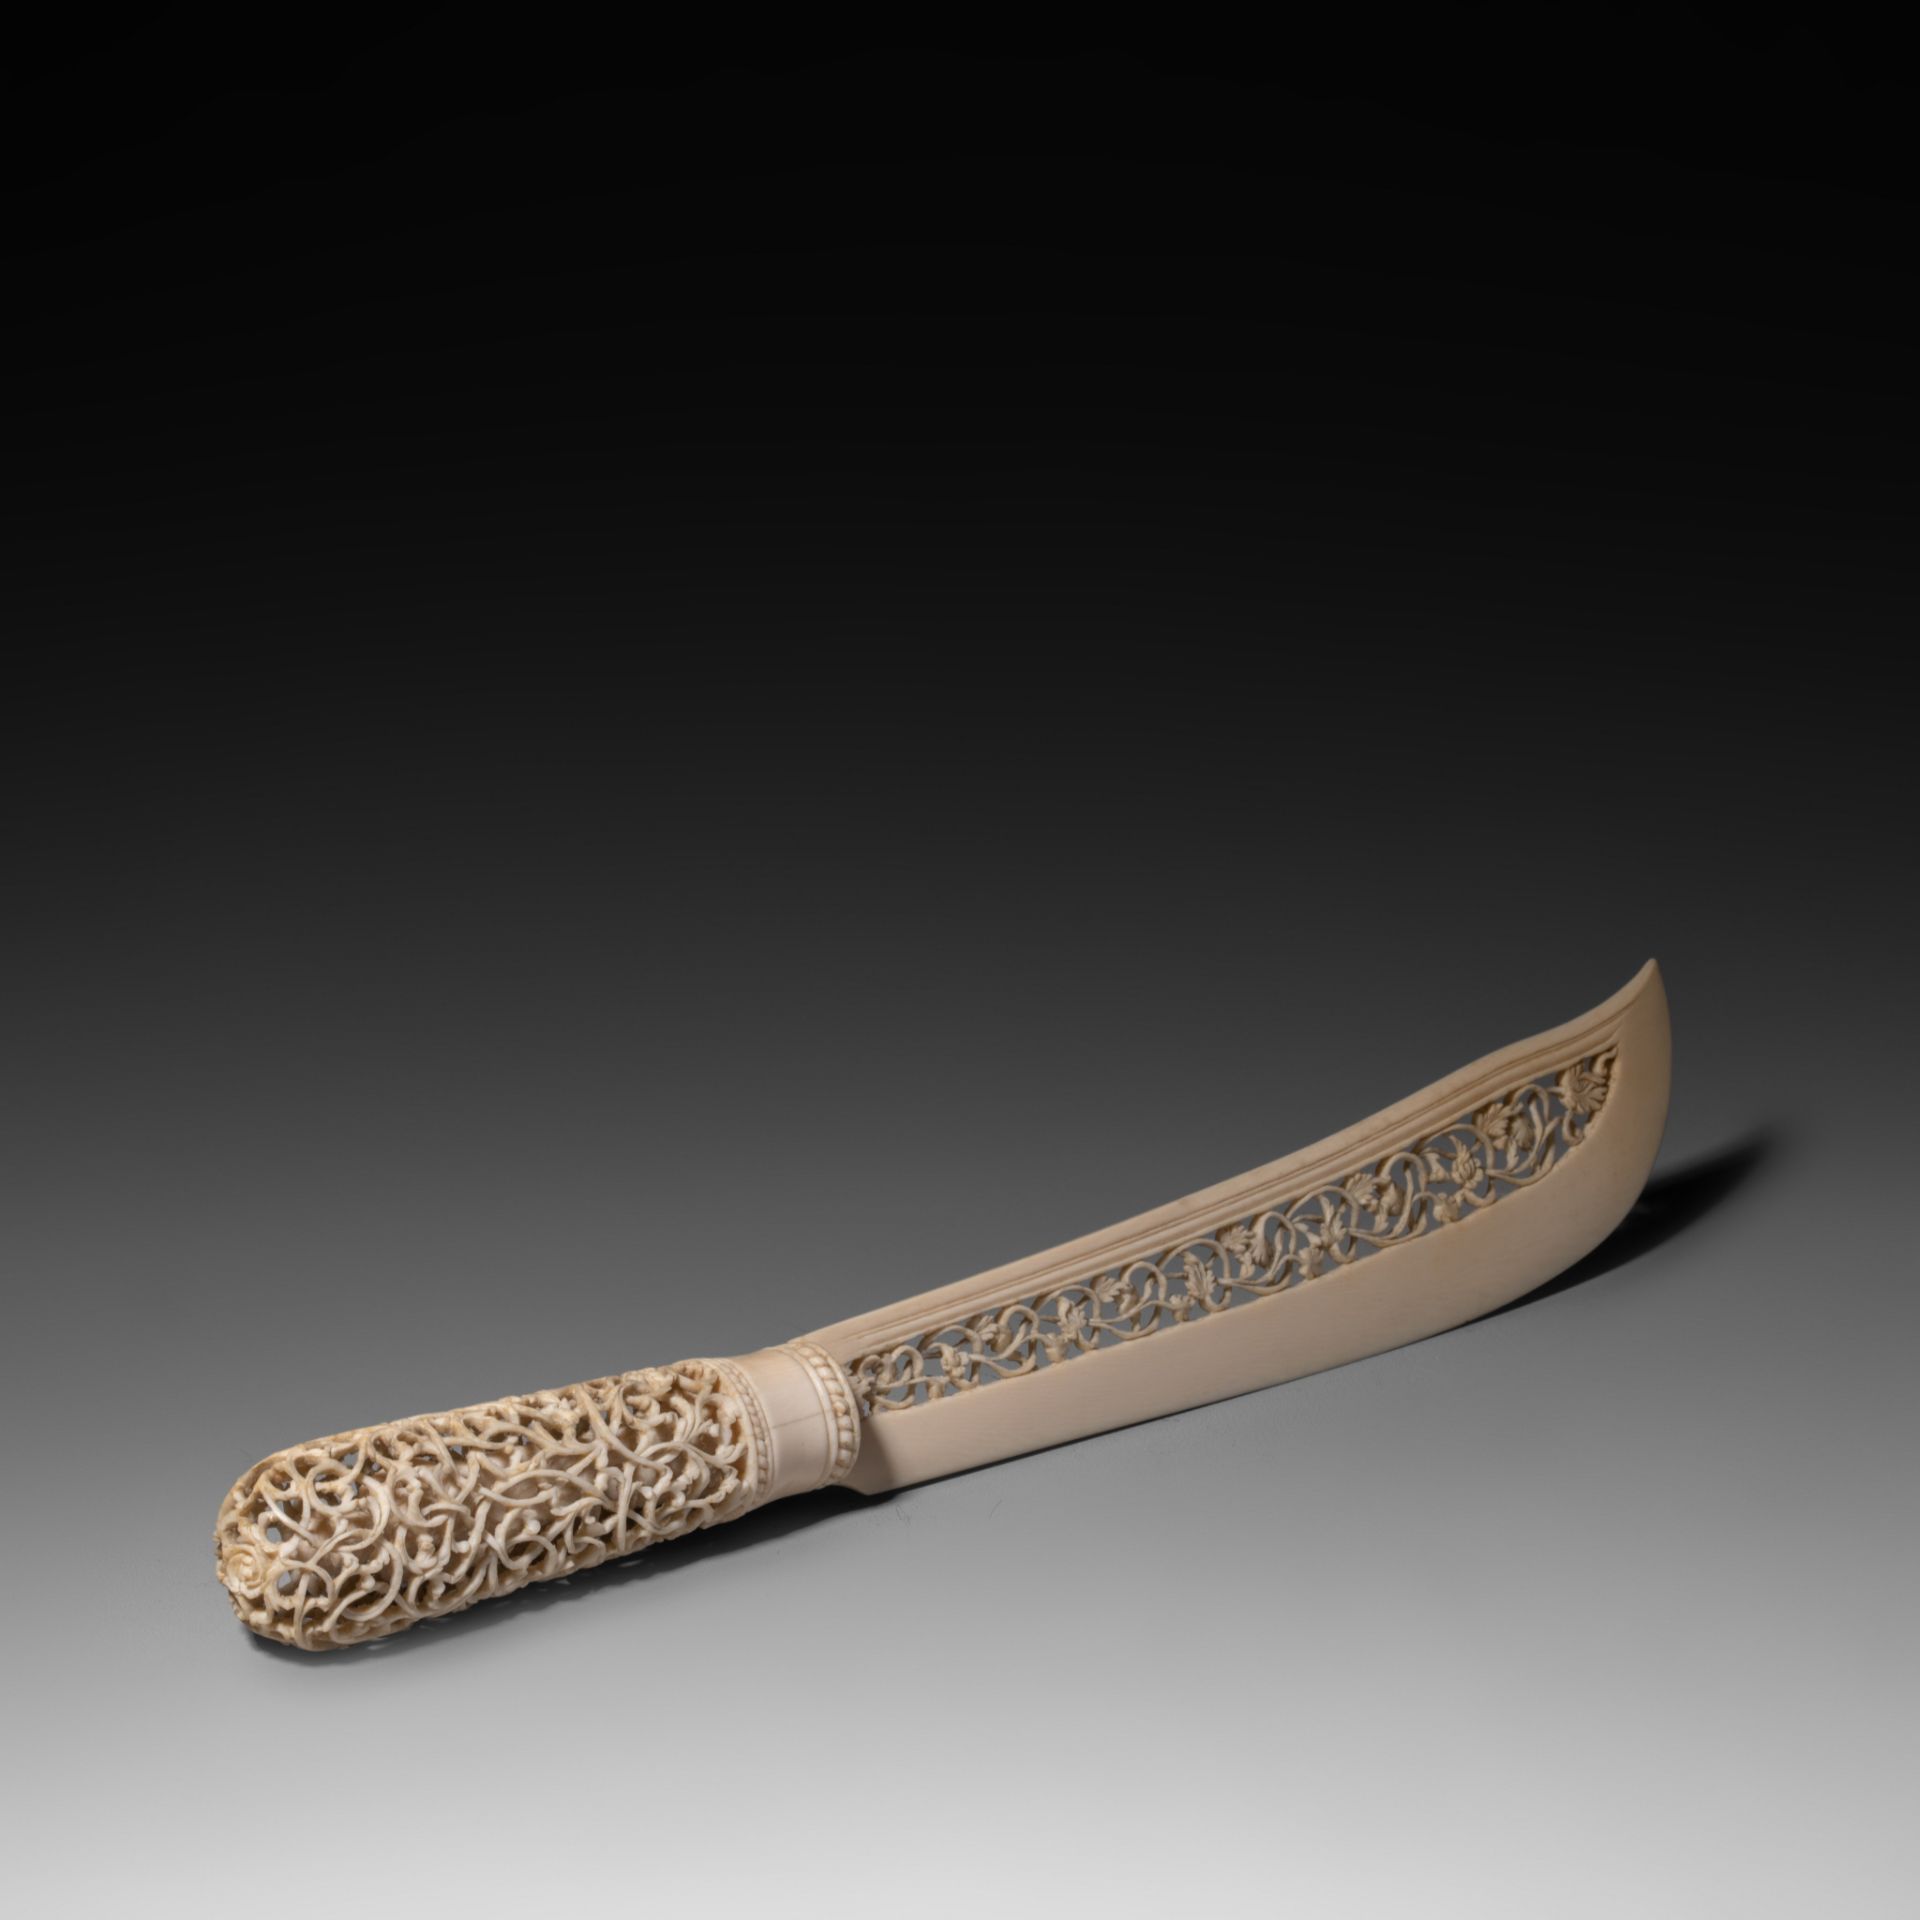 Two Burmese Colonial Ivory paperknives, L 51 cm - 200 g / L 35,8 cm - 80 g, both items are 19th or e - Bild 7 aus 18